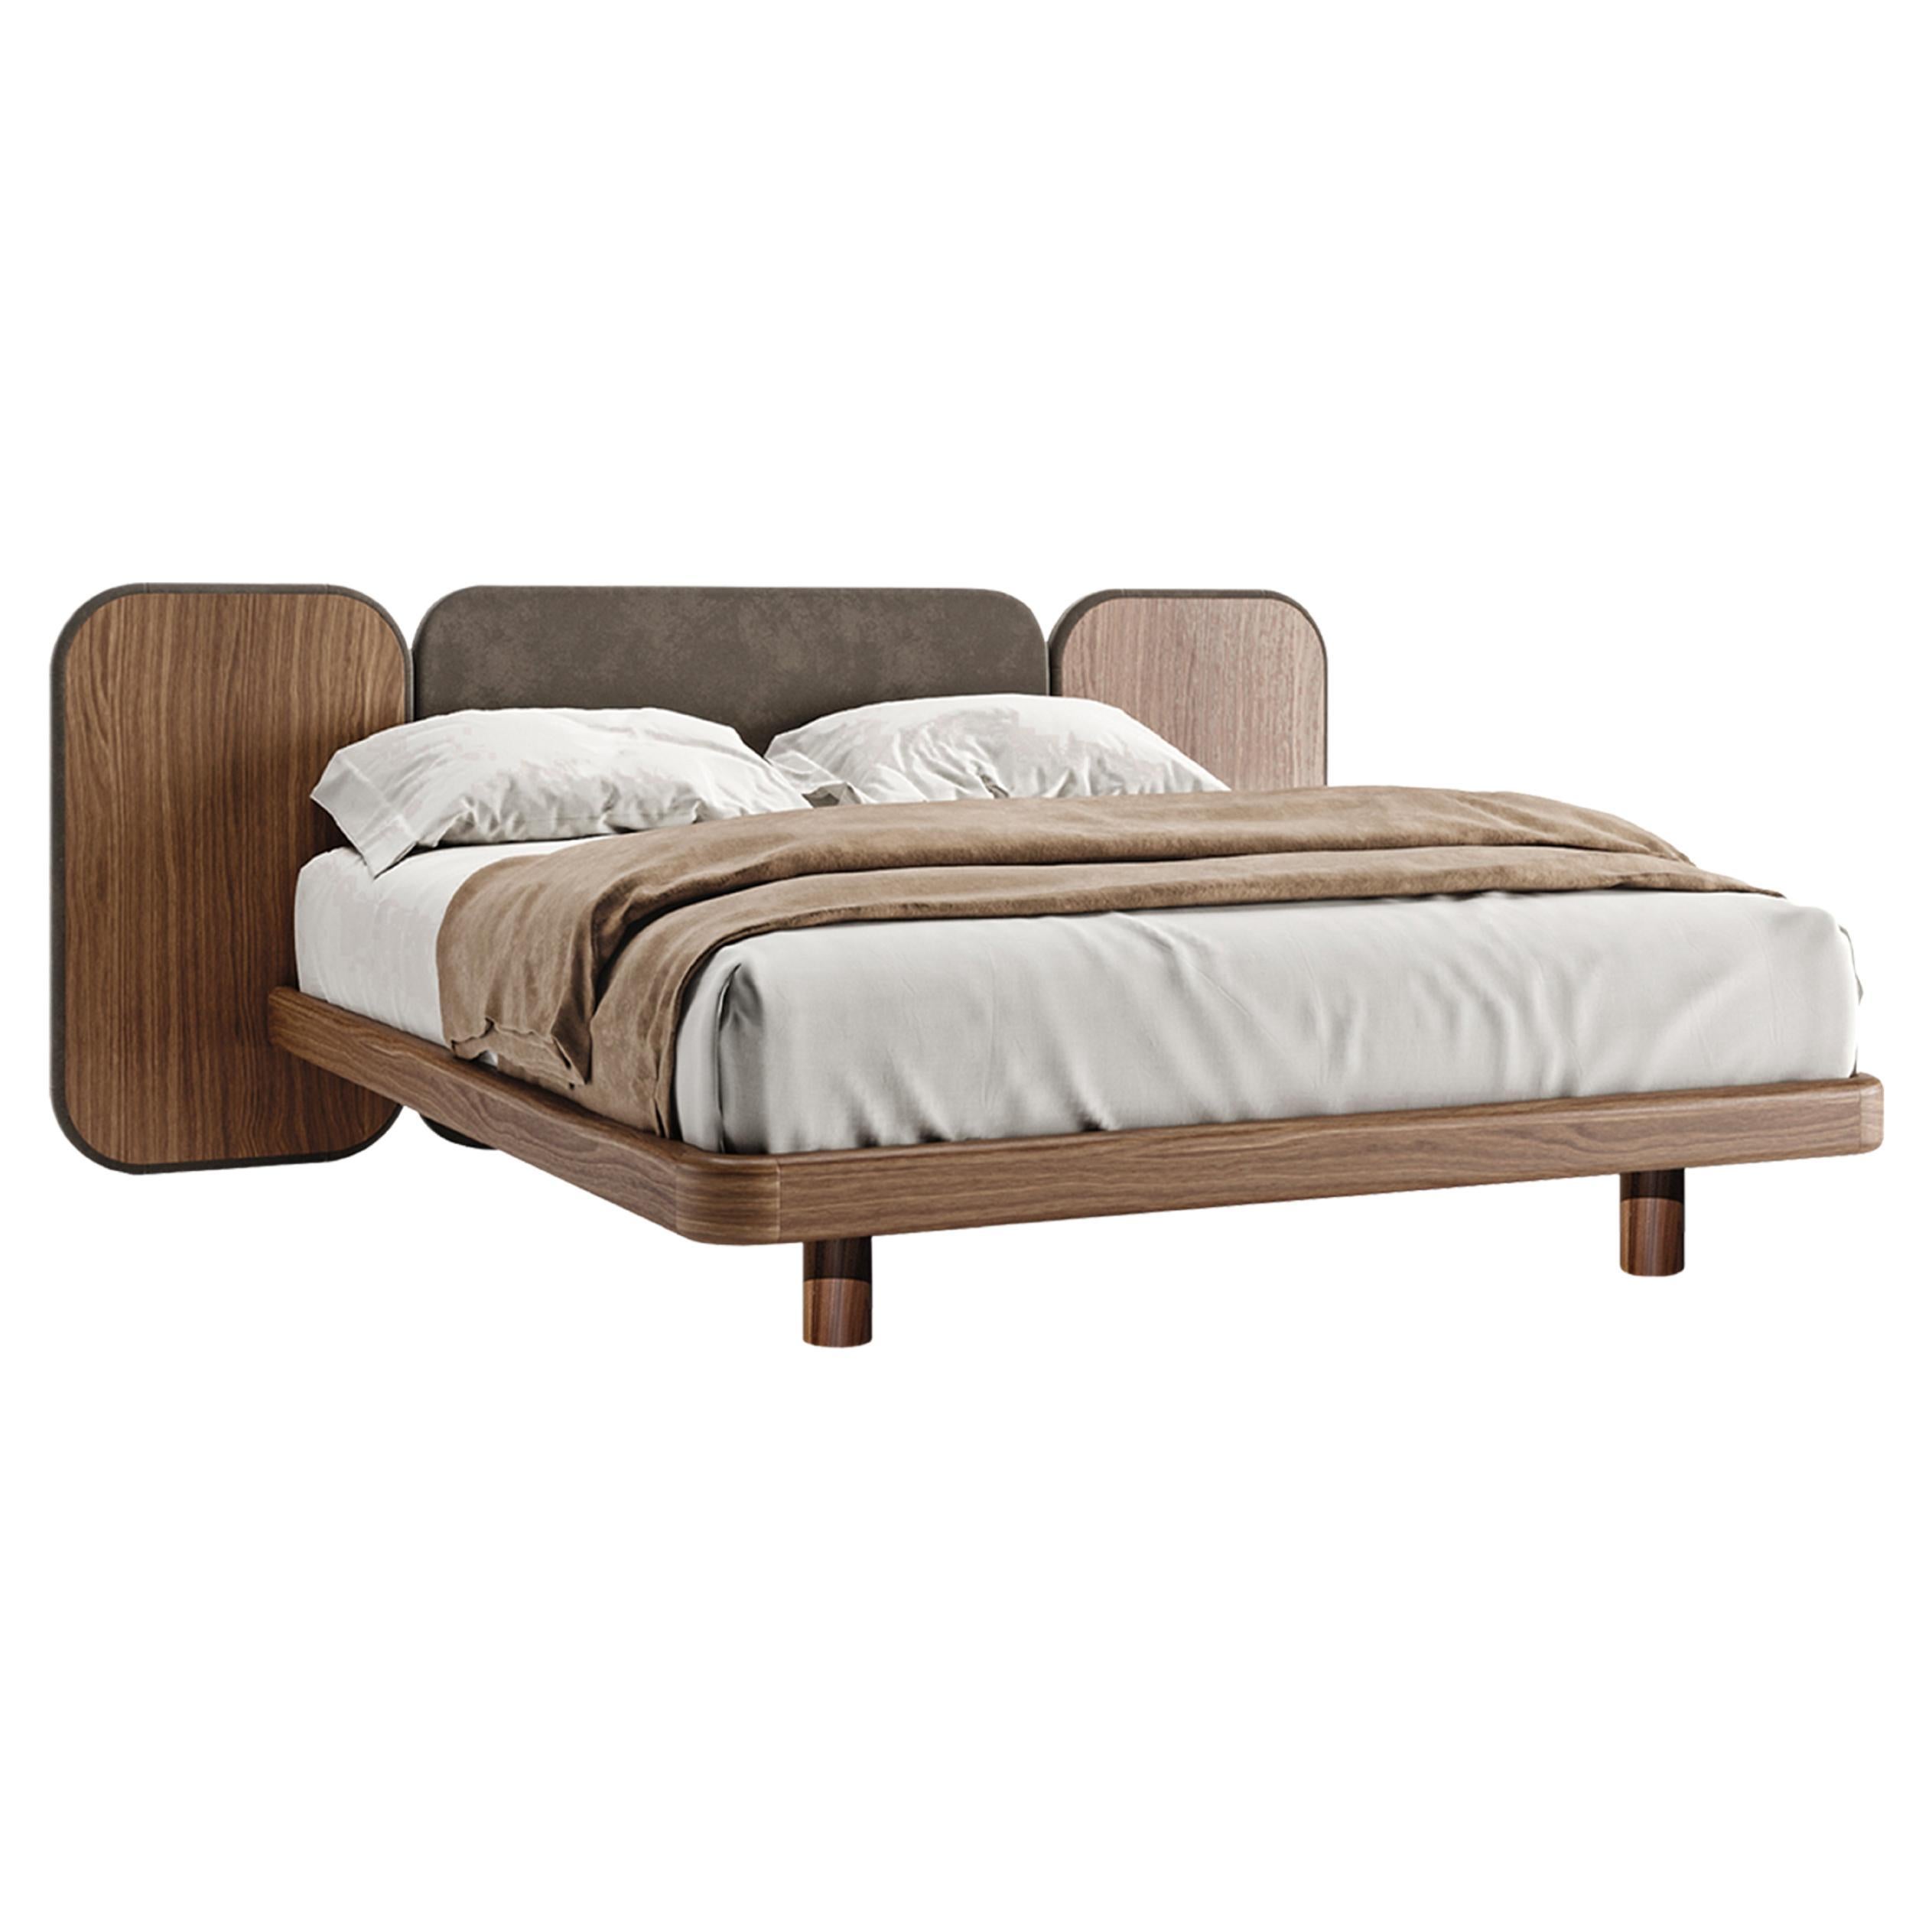 MOOZA Monarch Bed For Sale